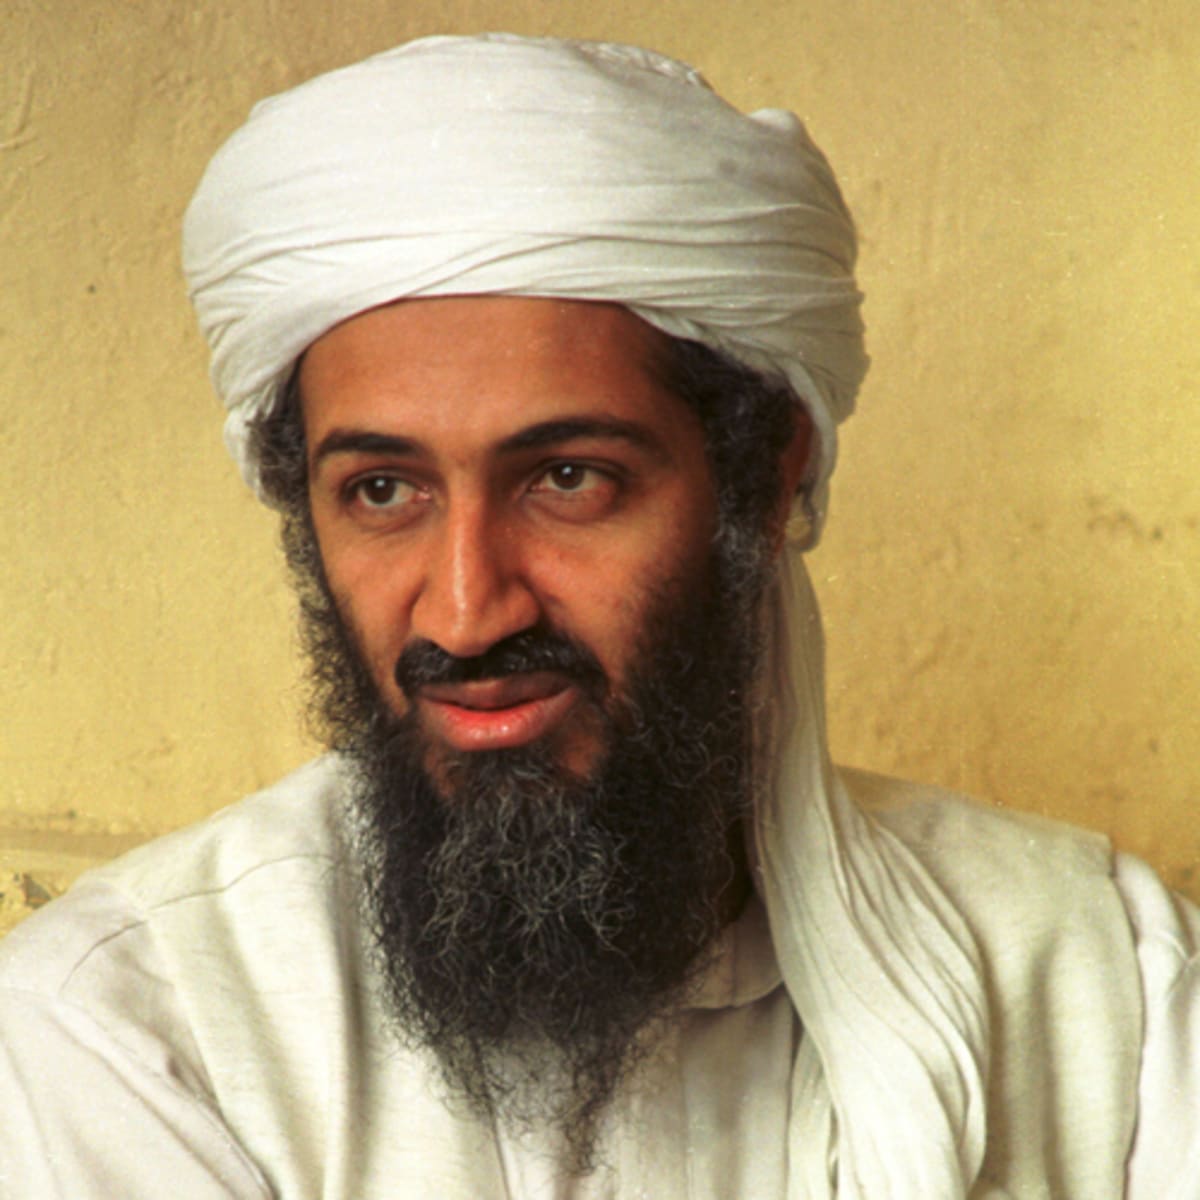 Teacher Suspended After Attempting To Represent Prophet Muhammad In Class With An Image Of Osama Bin Laden